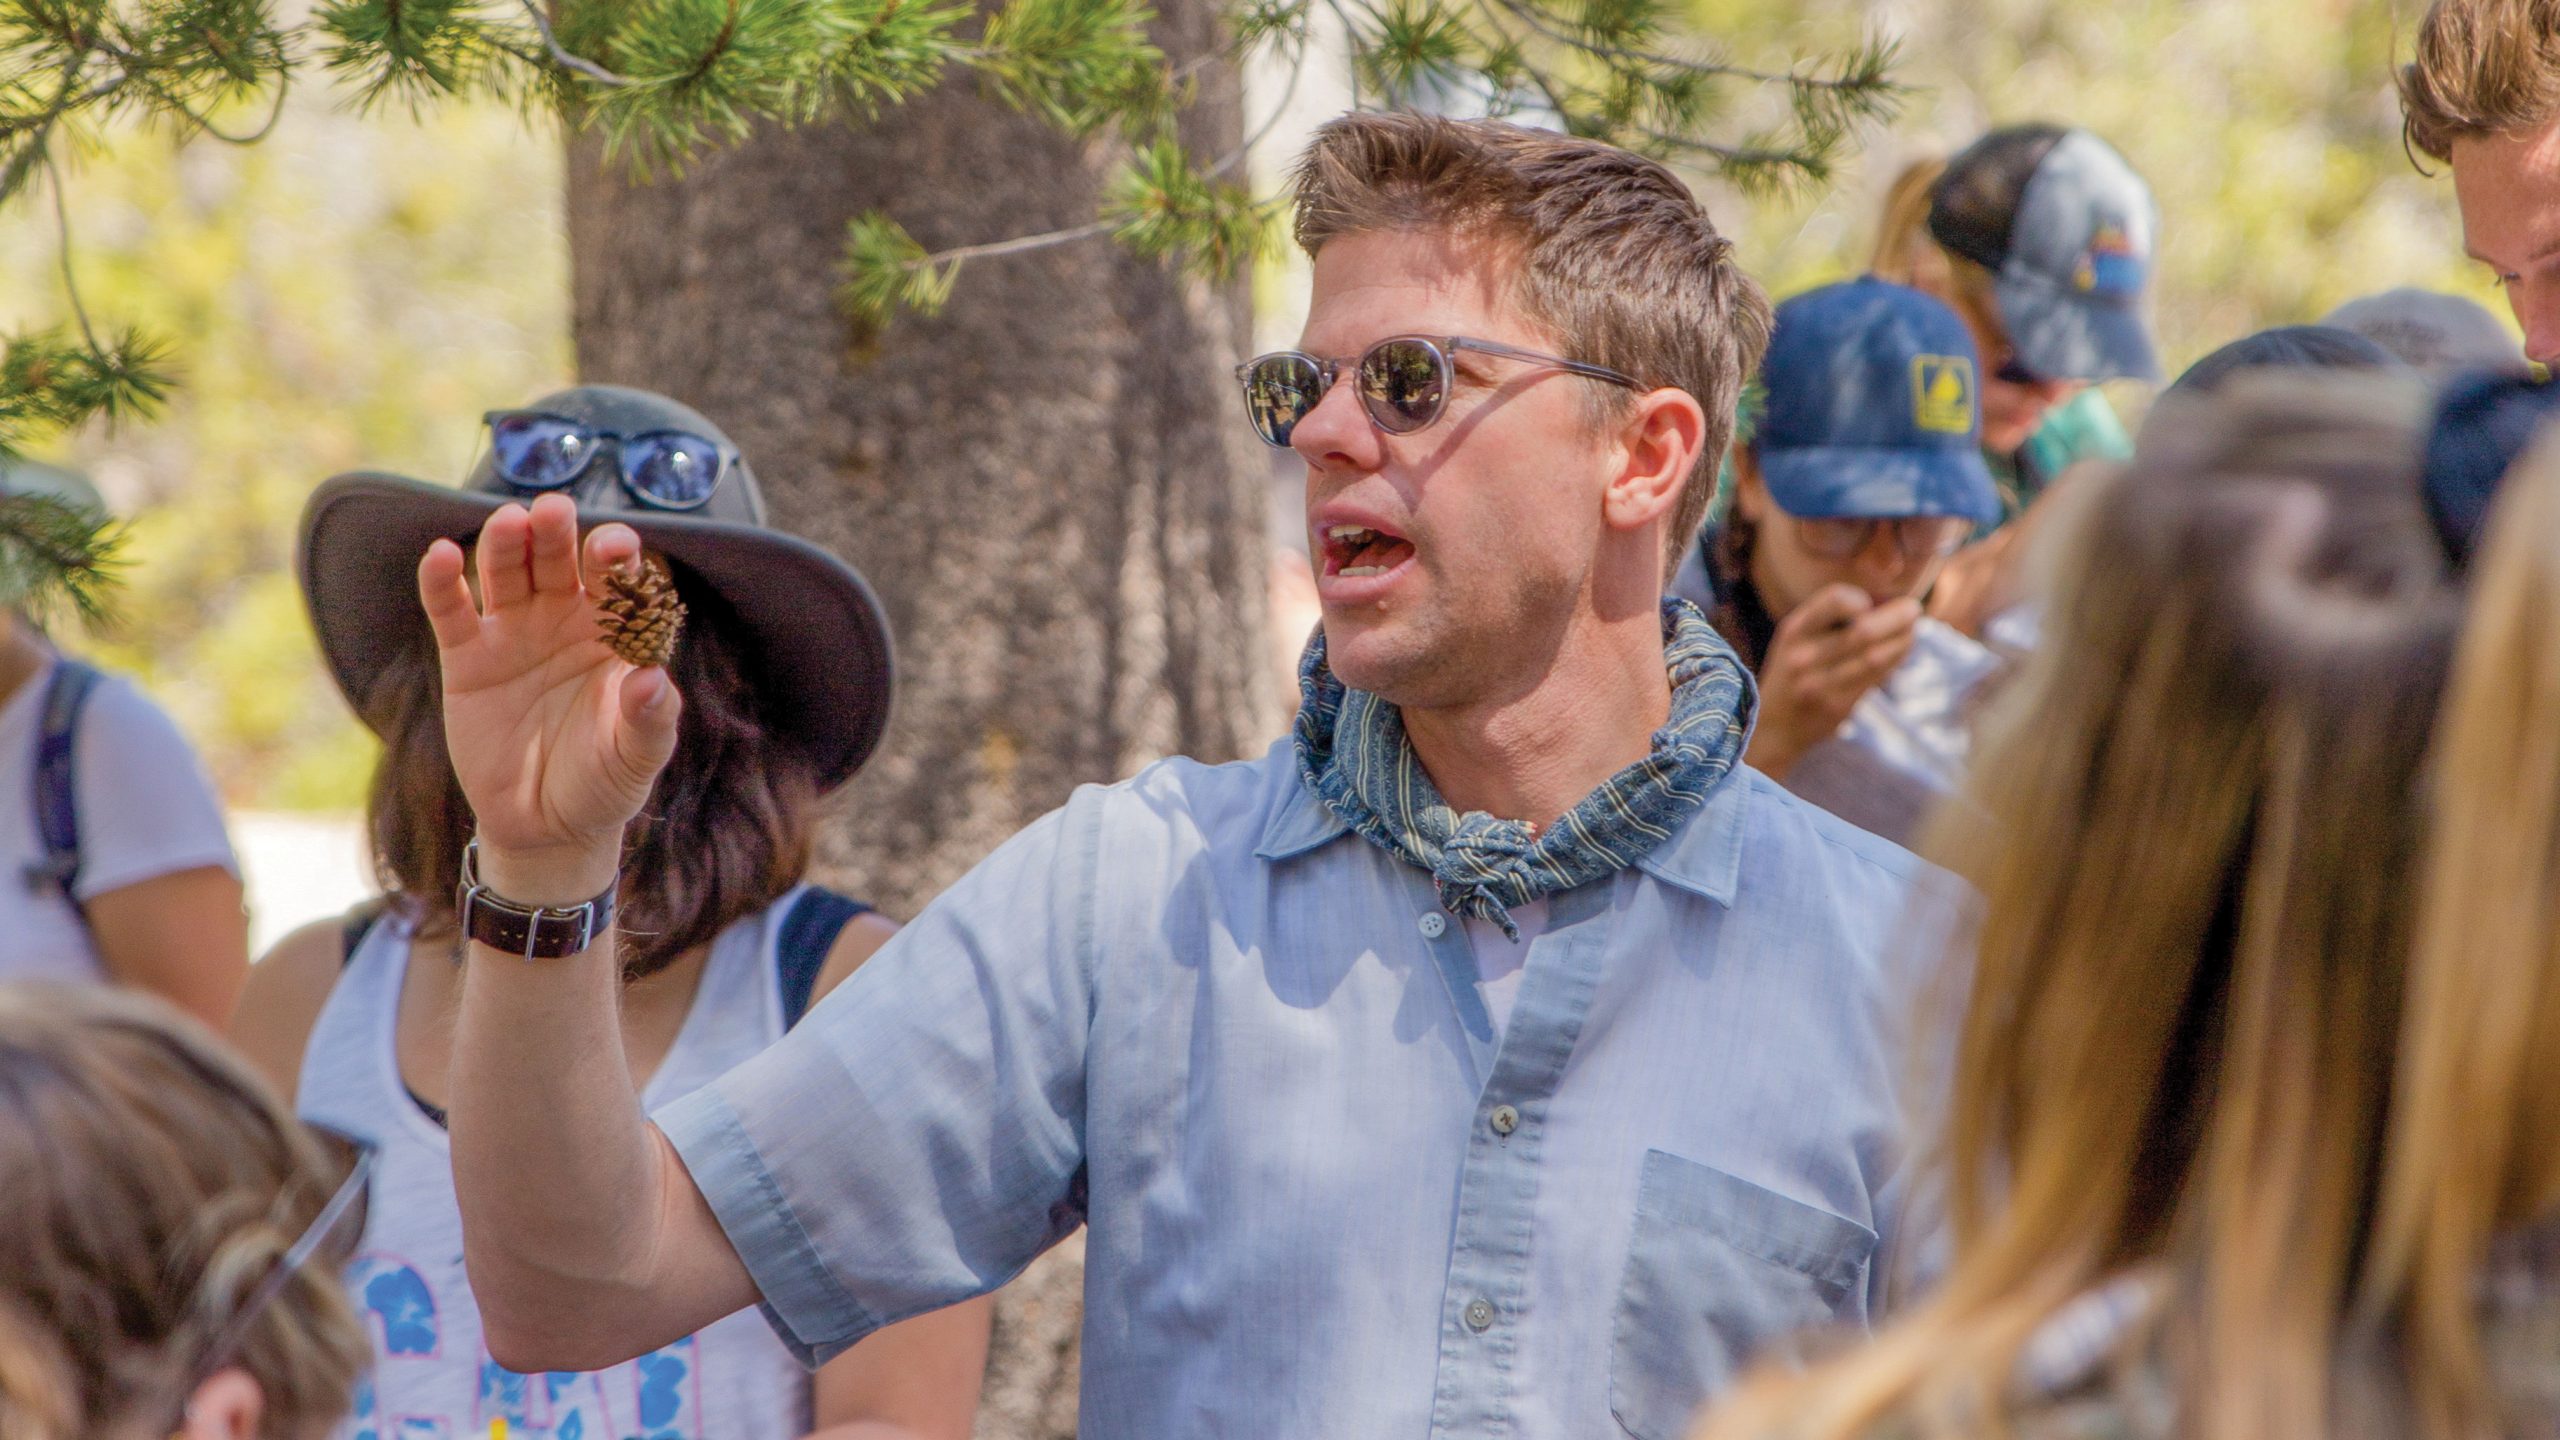 Biology Professor Matt Ritter holds a pinecone while lecturing students during a field trip.